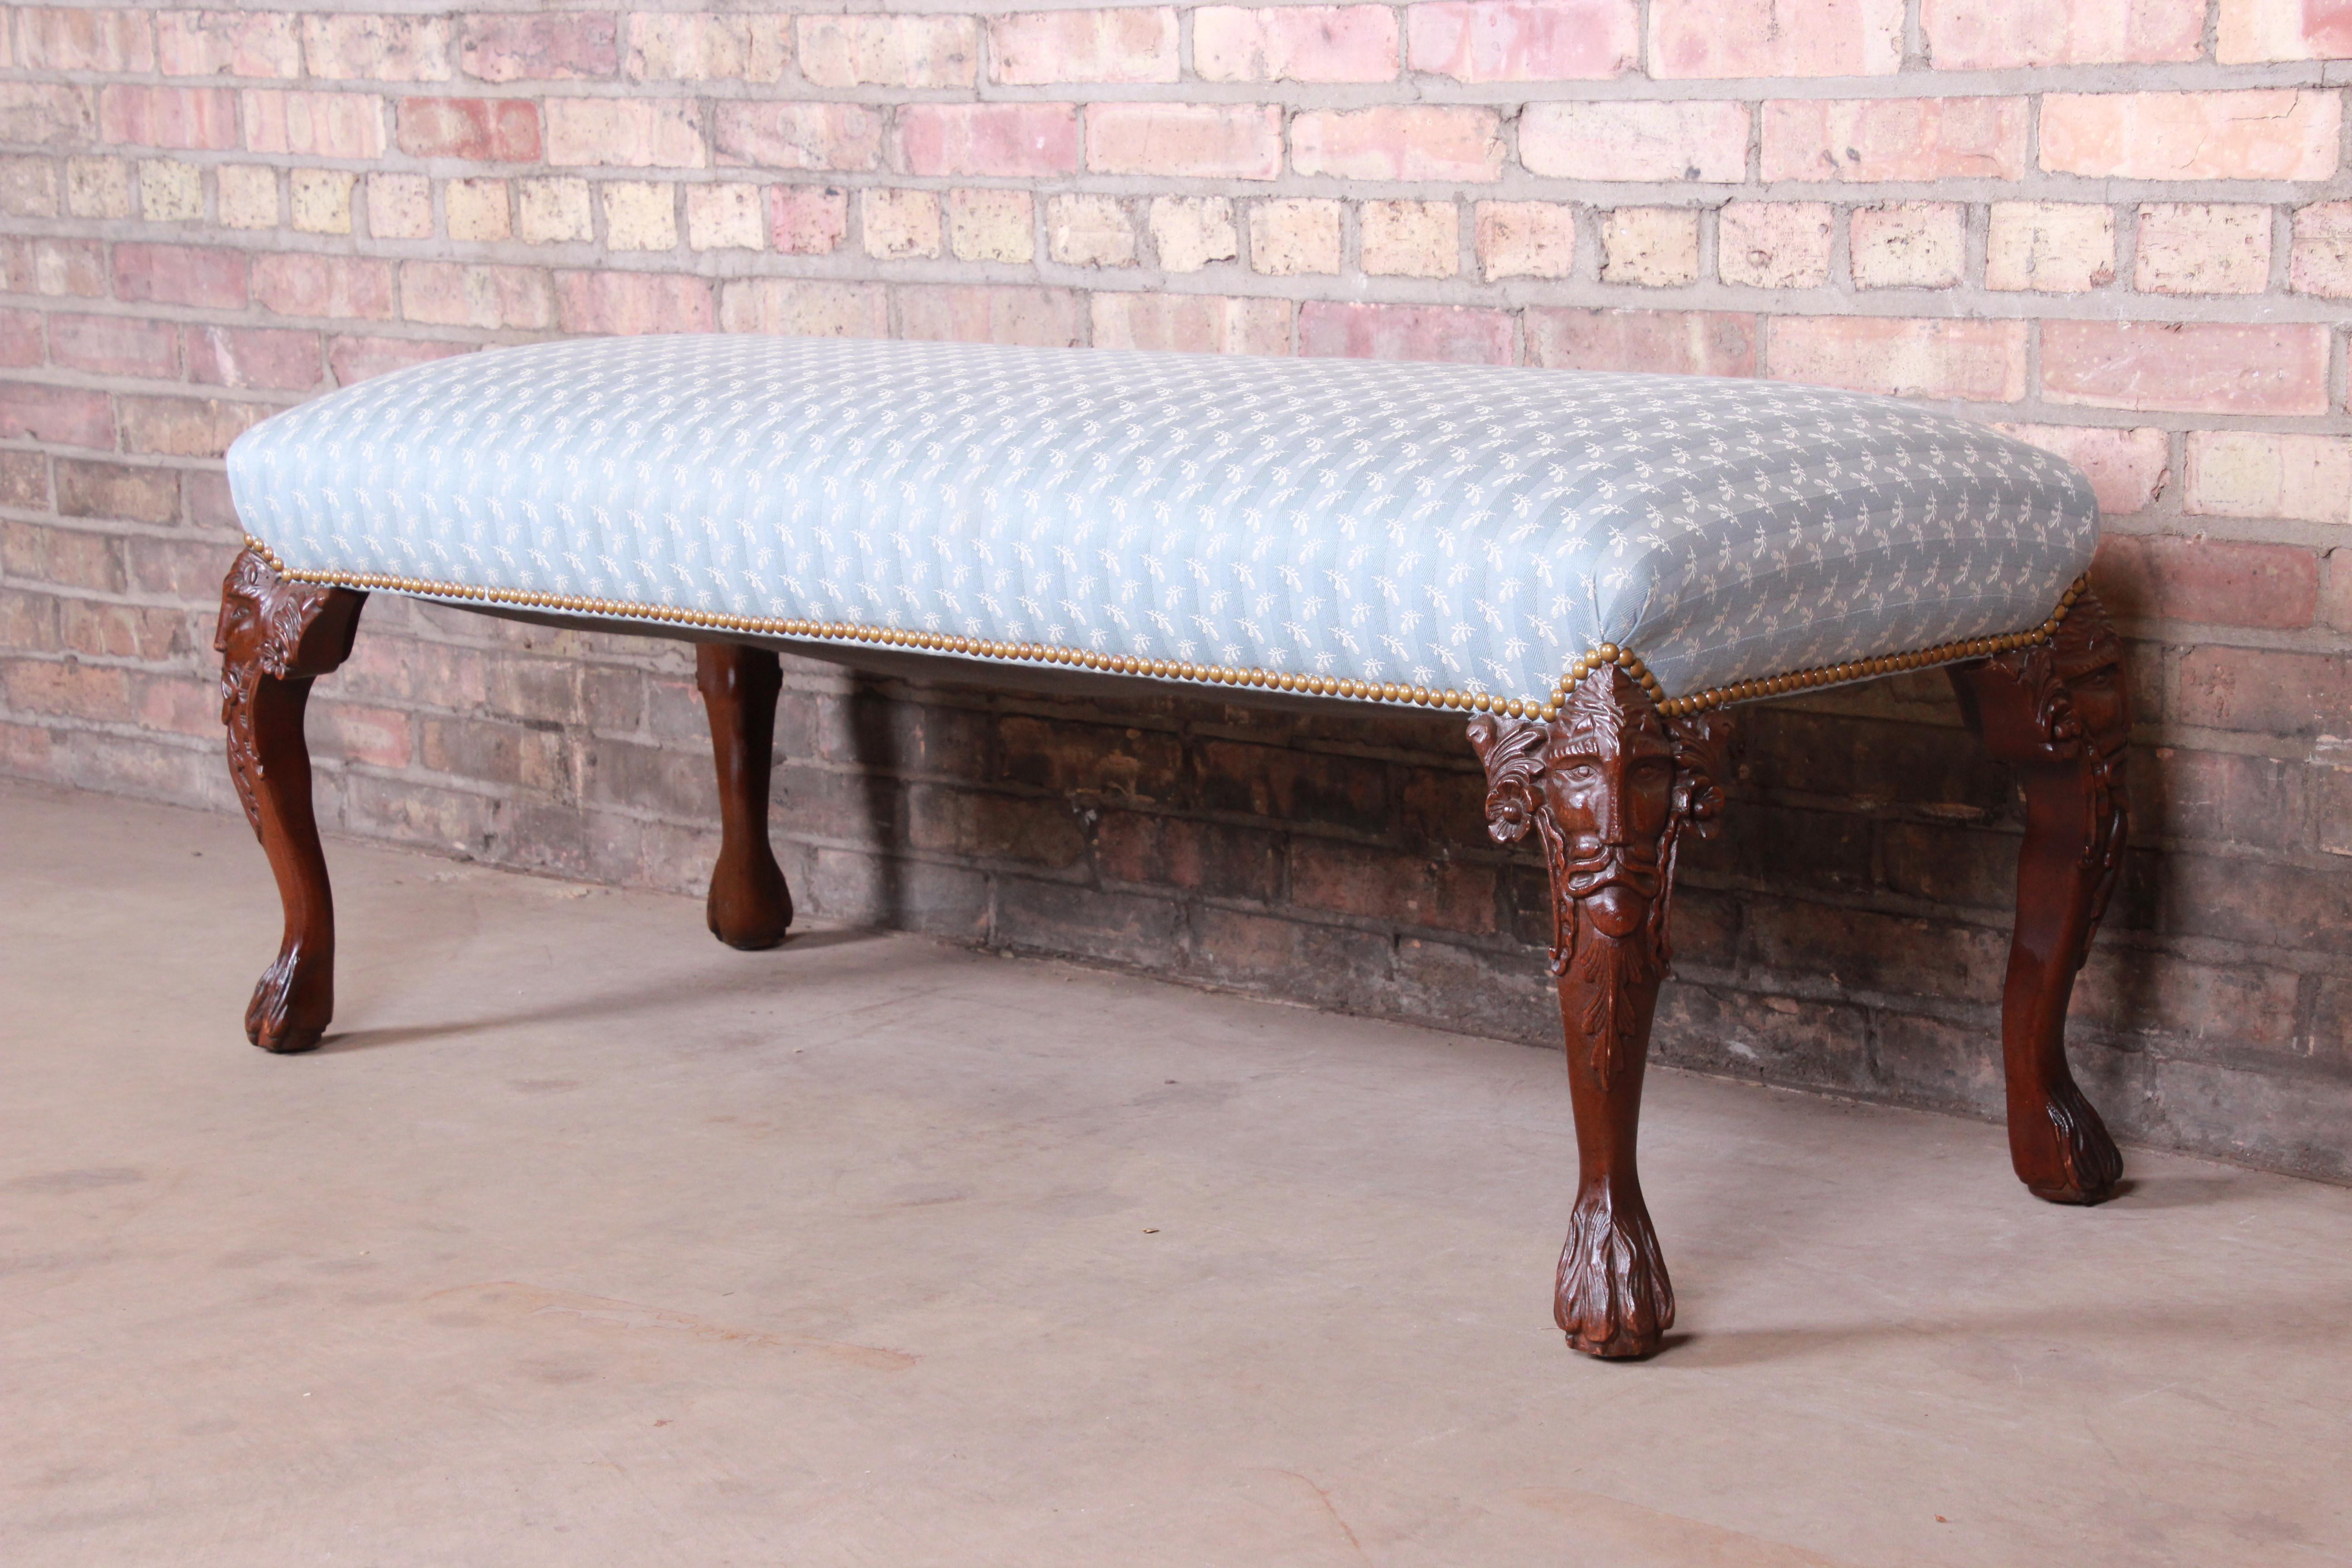 A gorgeous vintage carved mahogany upholstered window bench or bed bench,

20th century.

Mahogany cabriole legs with carved faces, and studded light blue and ivory upholstery.

Measures: 51.88